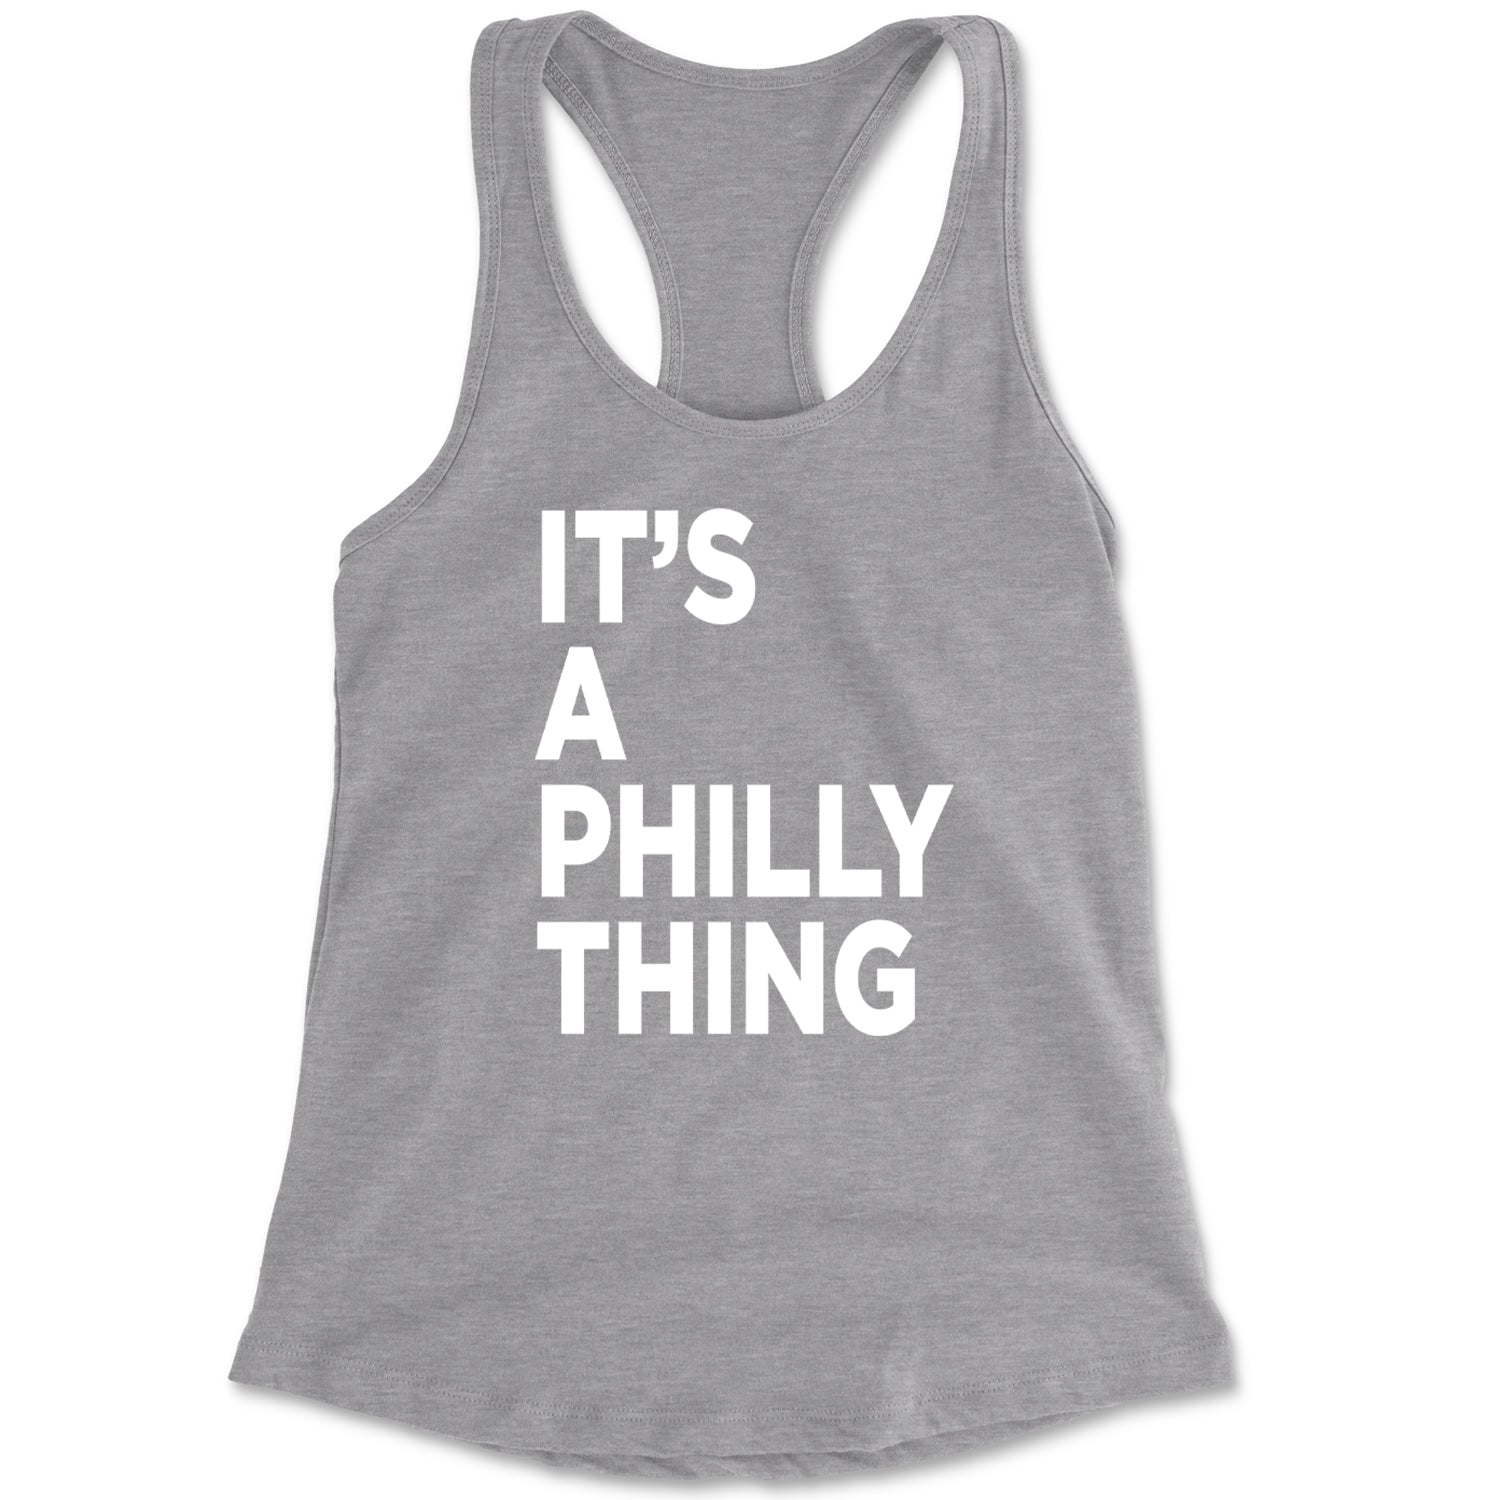 PHILLY It's A Philly Thing Racerback Tank Top for Women baseball, dilly, filly, football, jawn, morgan, Philadelphia, philli by Expression Tees